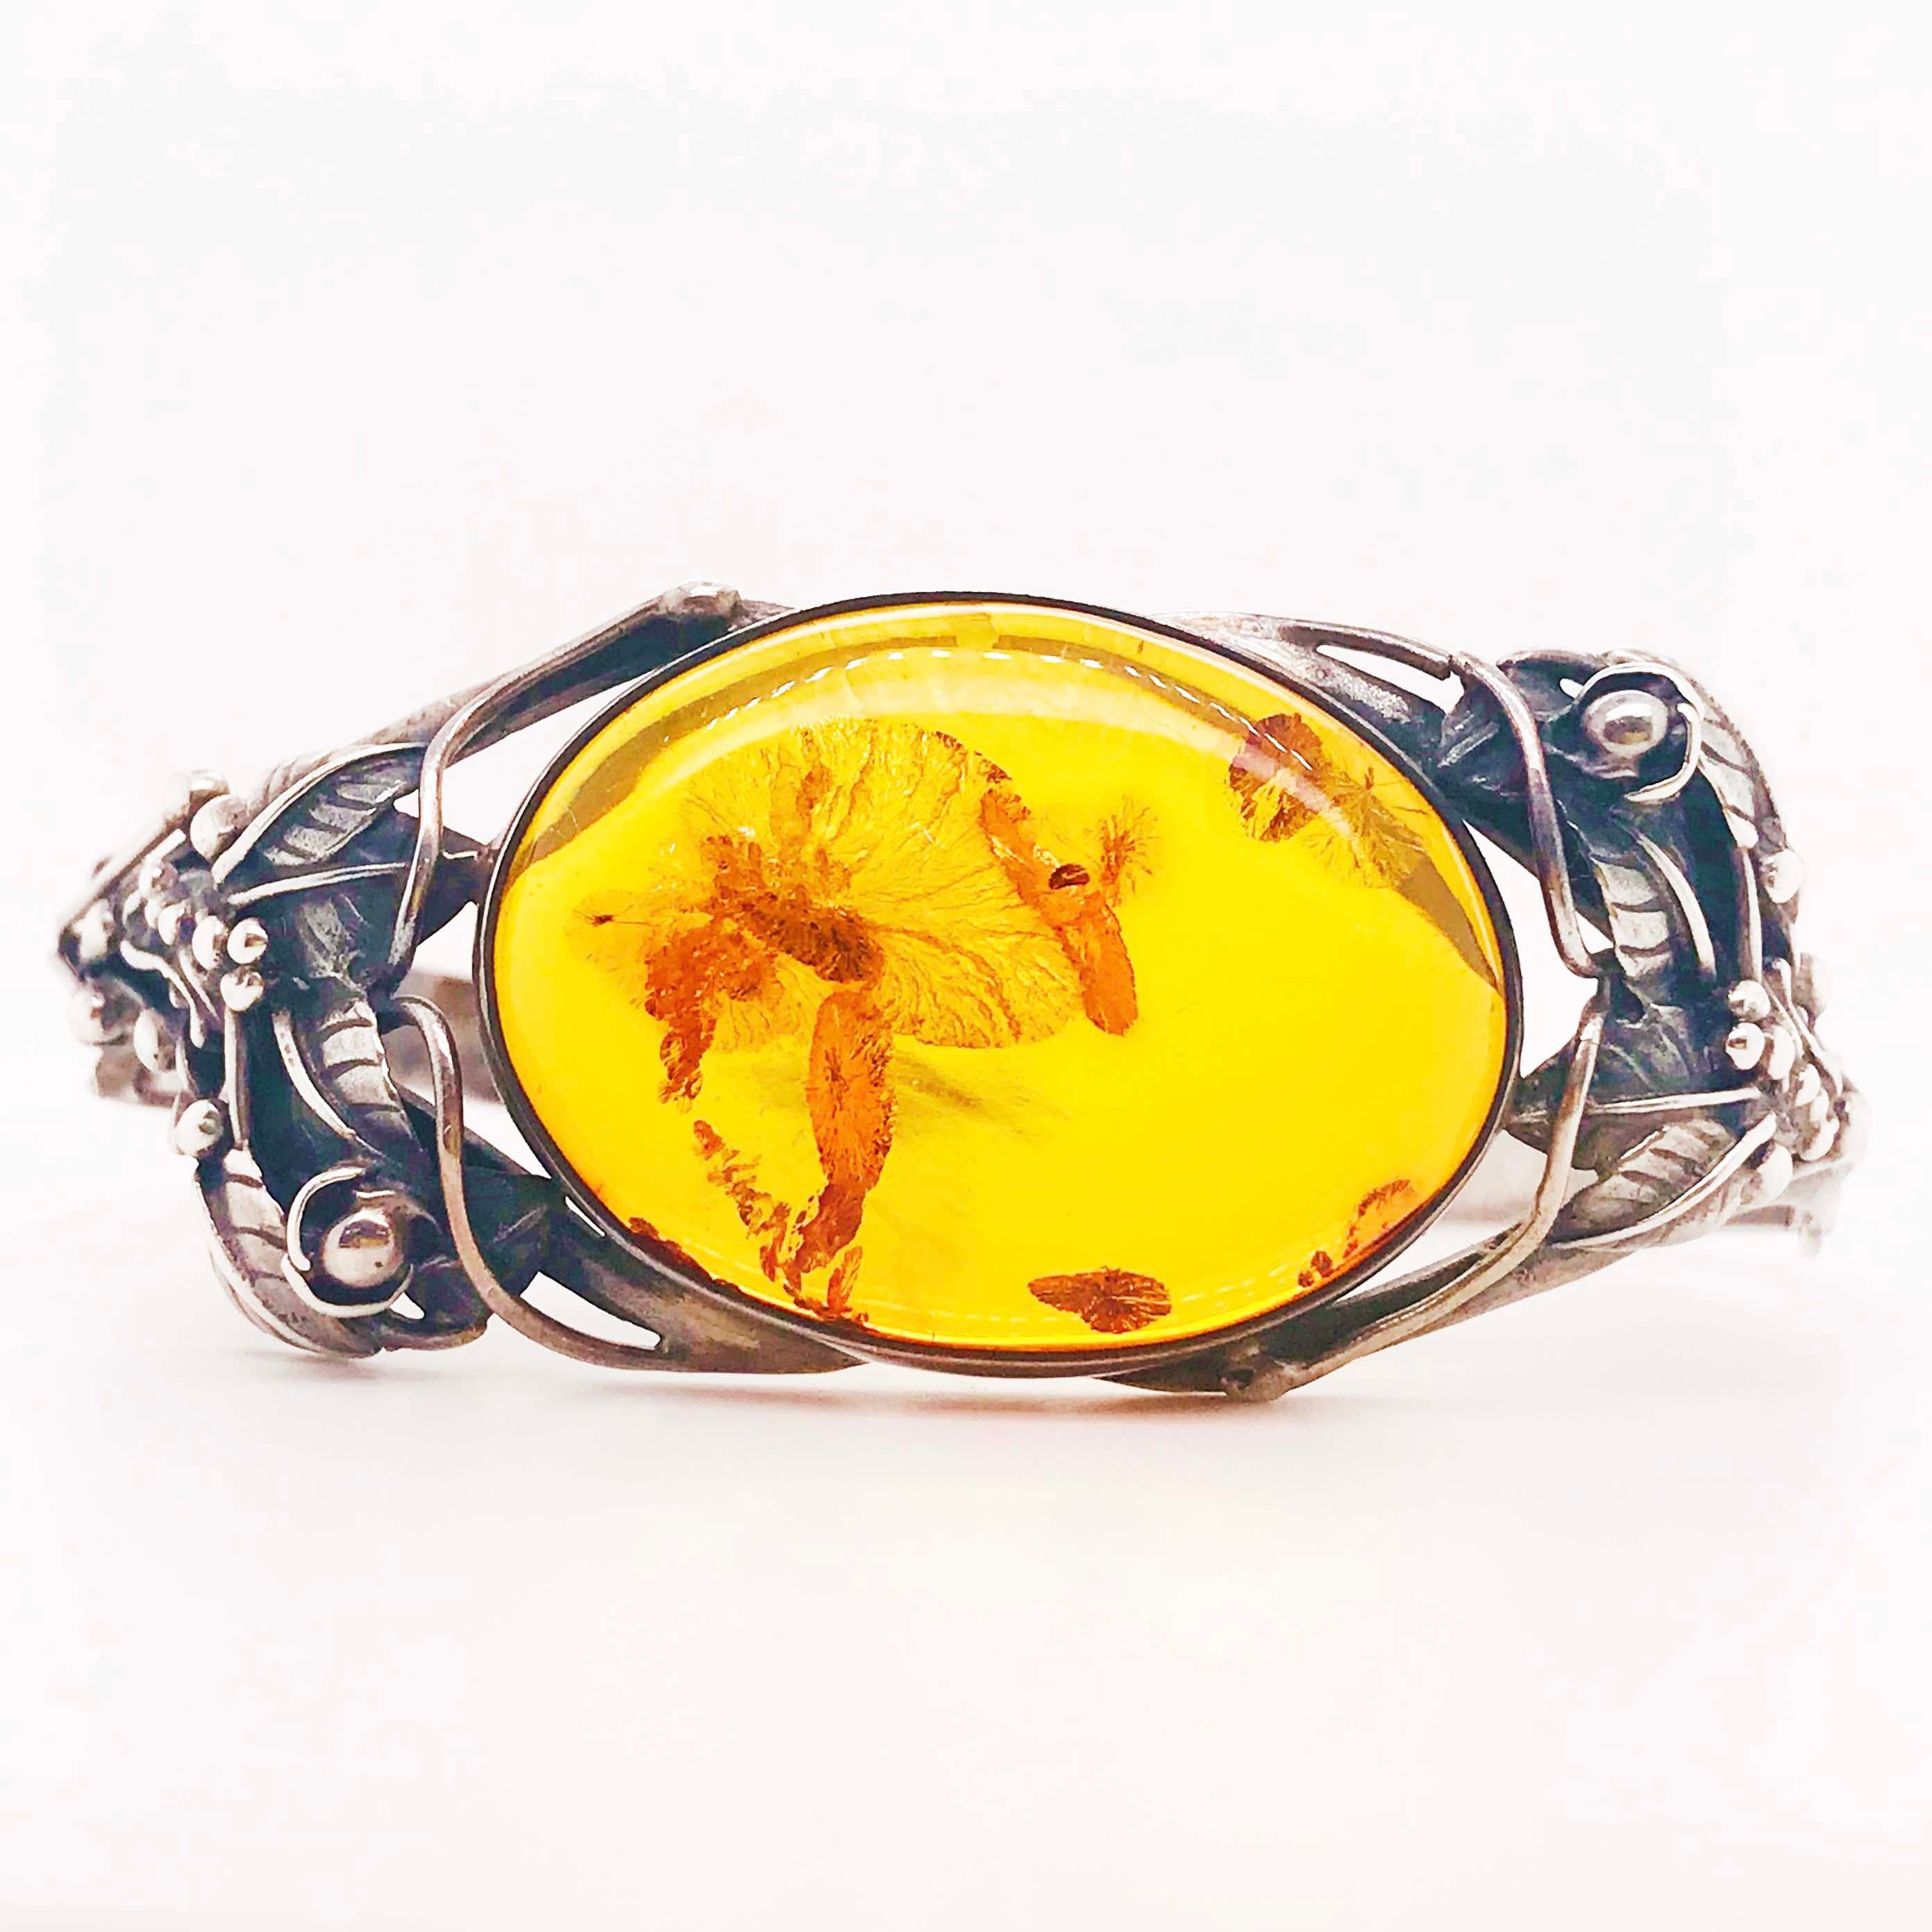 The handcrafted, original sterling silver amber bracelet holds an oval piece of amber gemstone with a history of its own. Amber is resin from ancient pine trees that has been hardened over a long period of time. Inside this amber you can see